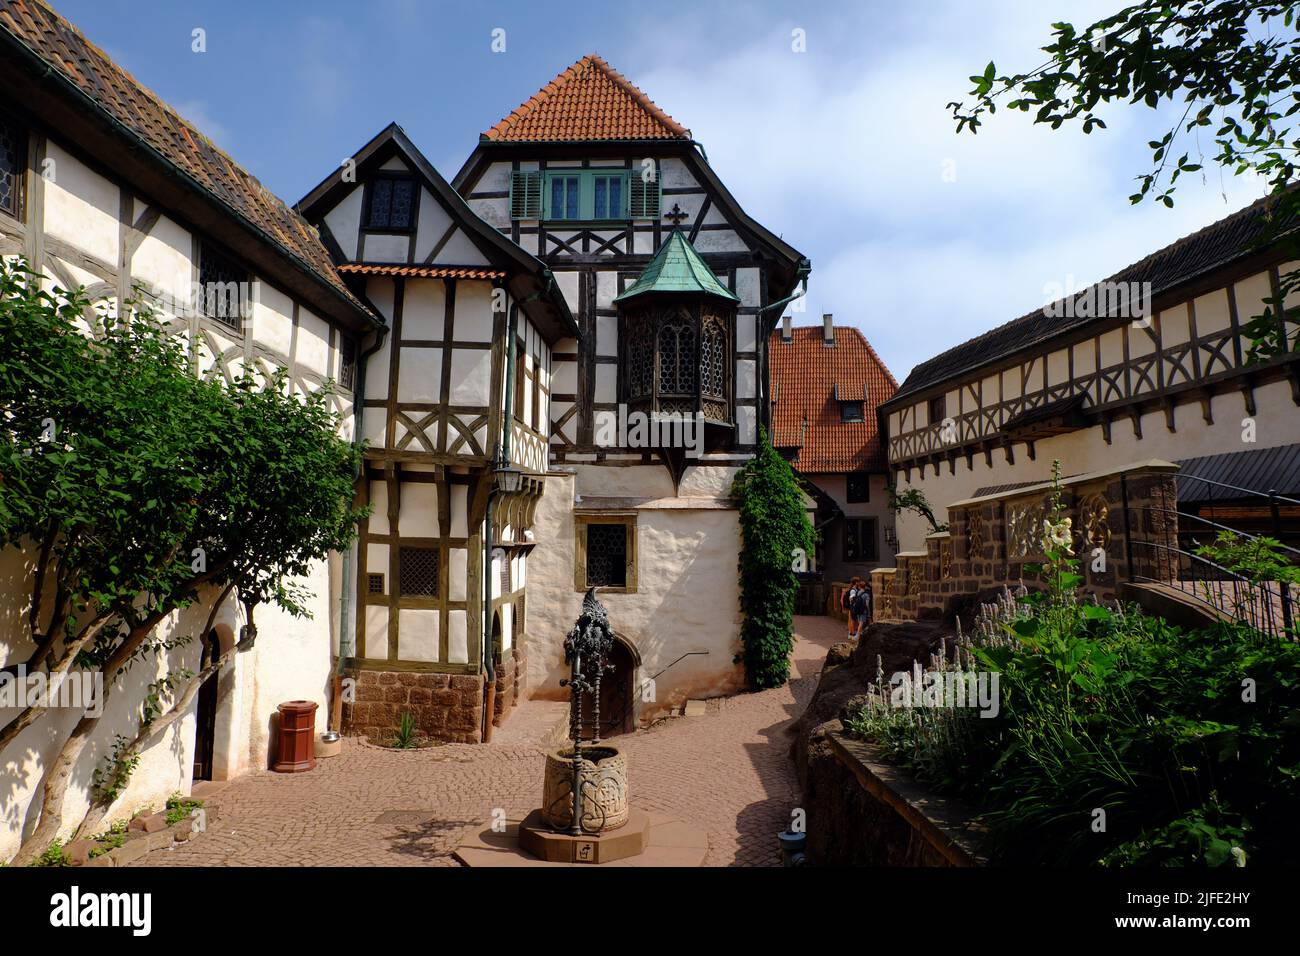 The Wartburg in Eisenach is a medieval castle famous as the place where Martin Luther translated his edition of the Bible into German. Stock Photo